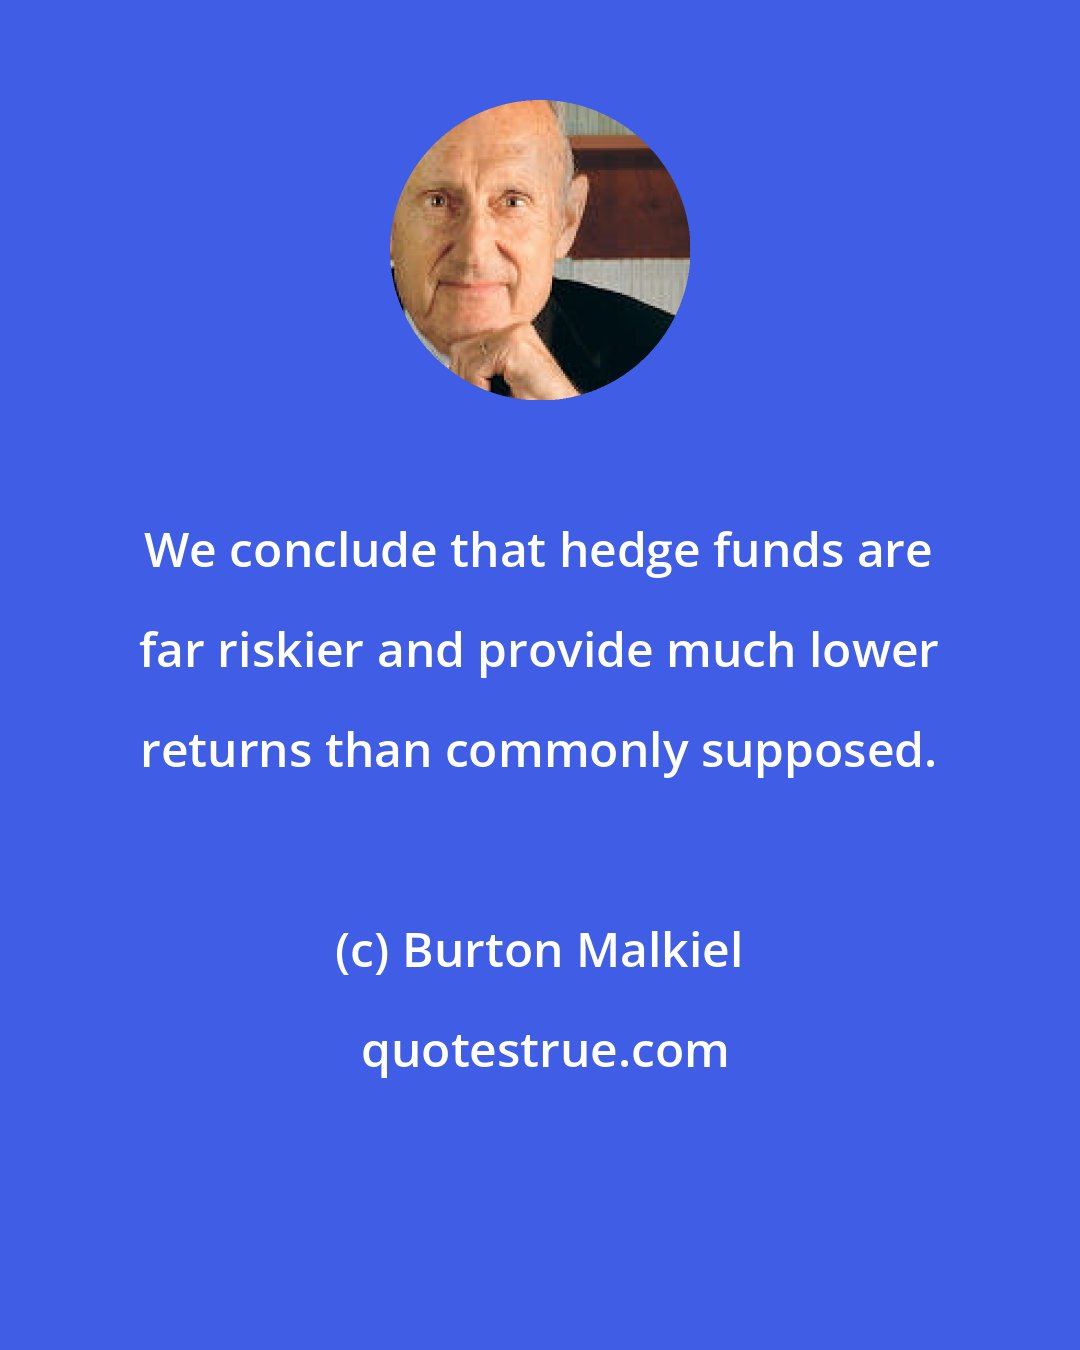 Burton Malkiel: We conclude that hedge funds are far riskier and provide much lower returns than commonly supposed.